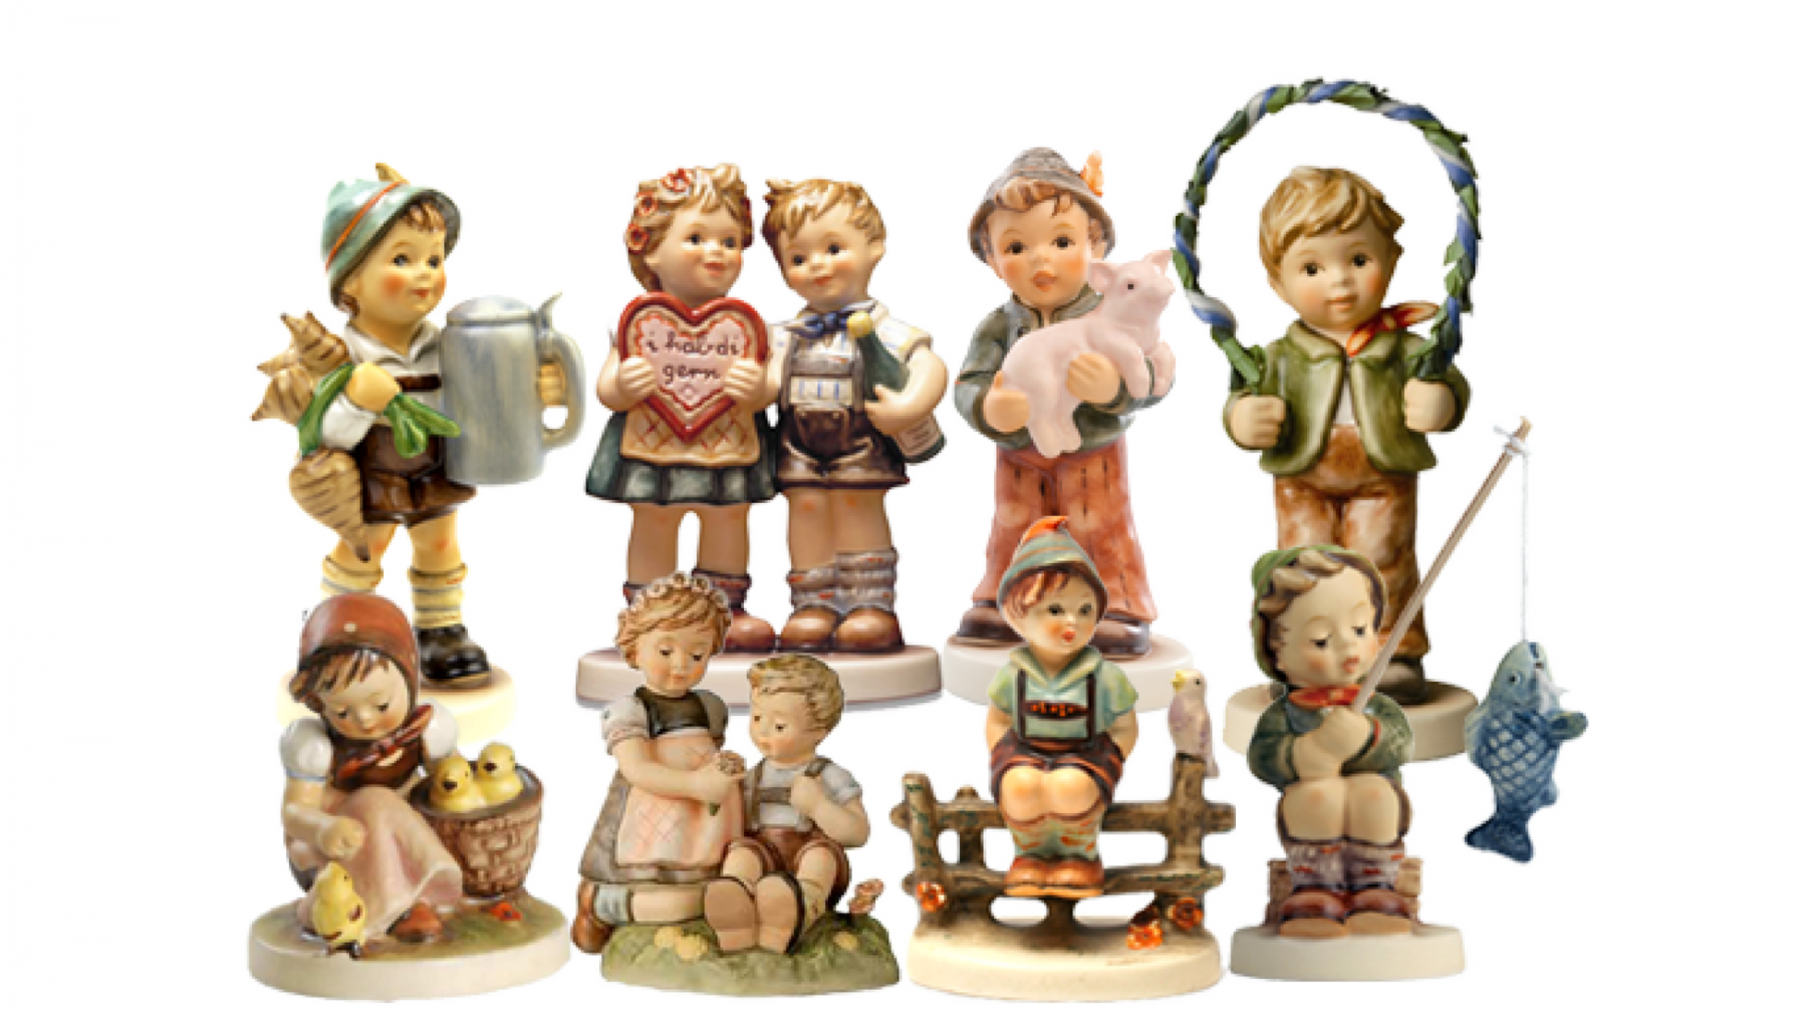 Hummel figurines from Germany